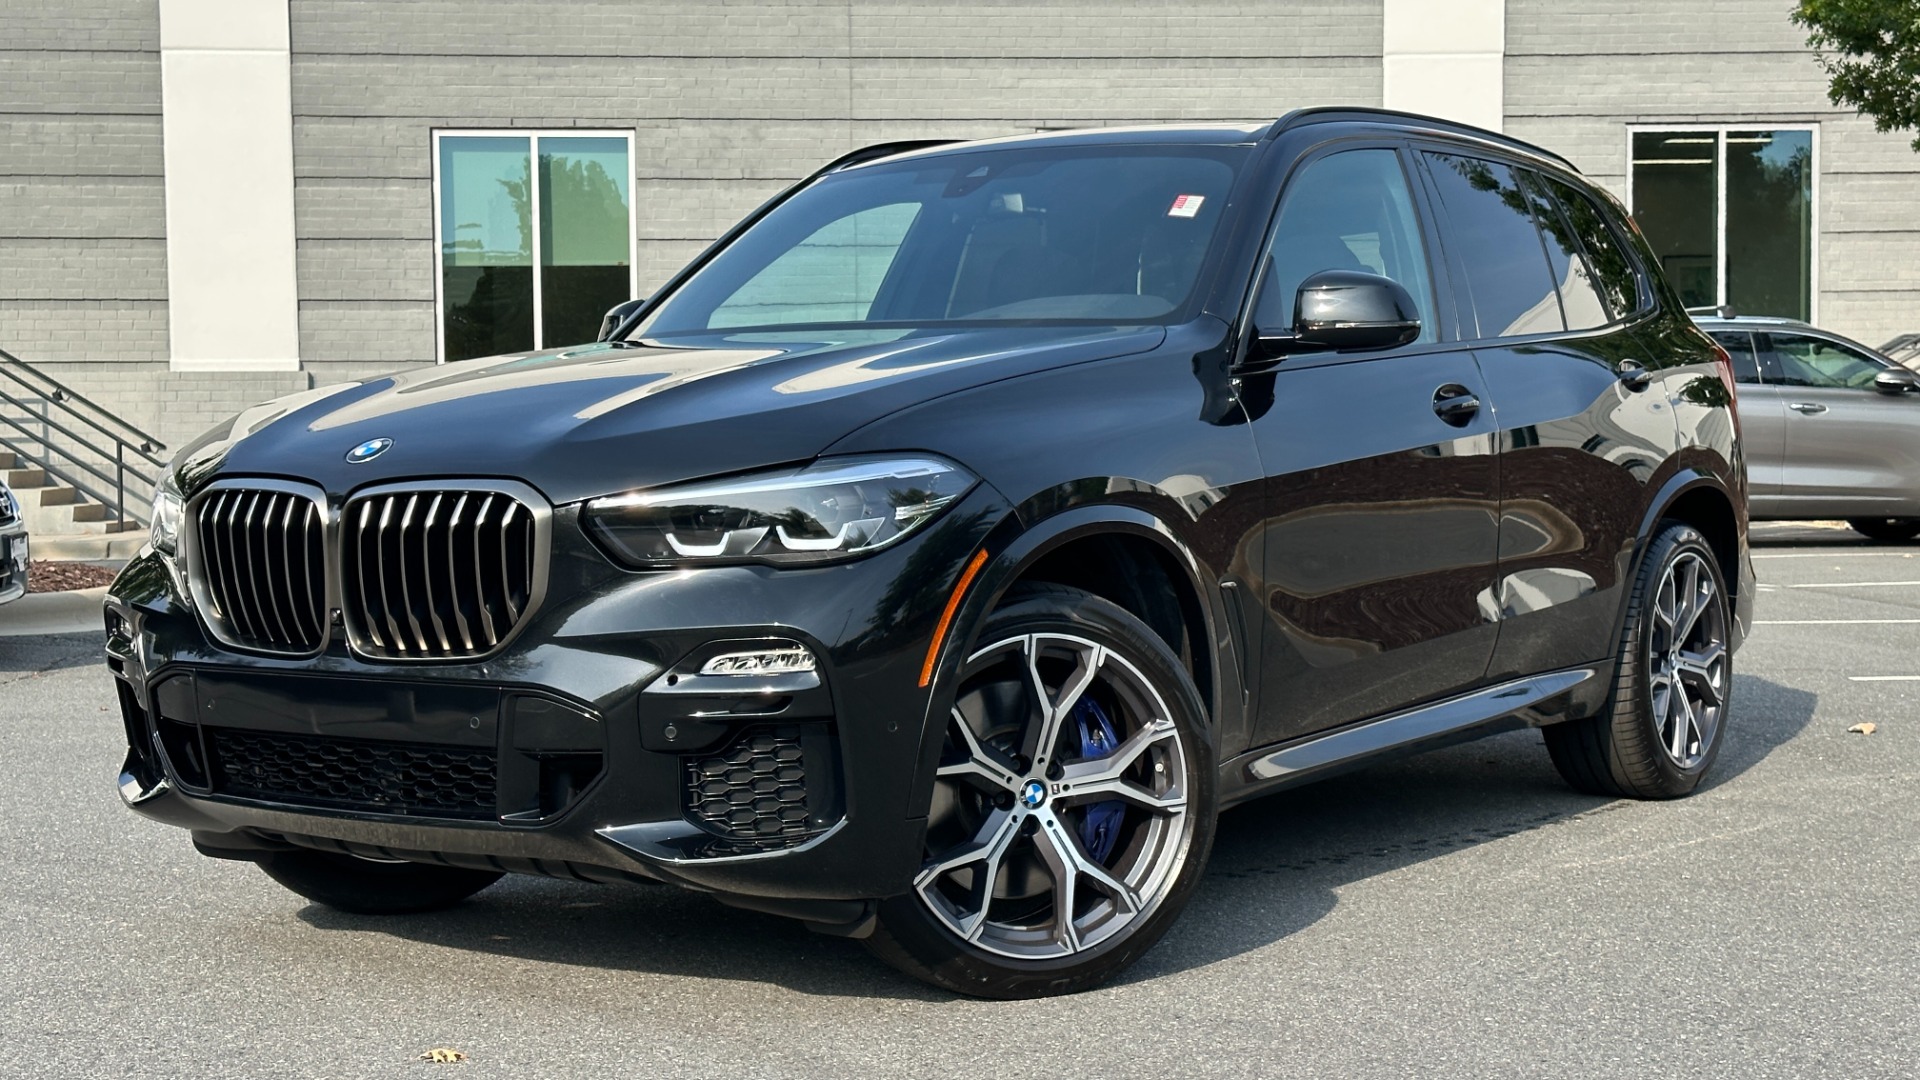 Used 2020 BMW X5 M50i / PREMIUM / TRAILER HITCH / BLACK TRIM / PARKING ASSIST for sale $54,995 at Formula Imports in Charlotte NC 28227 1